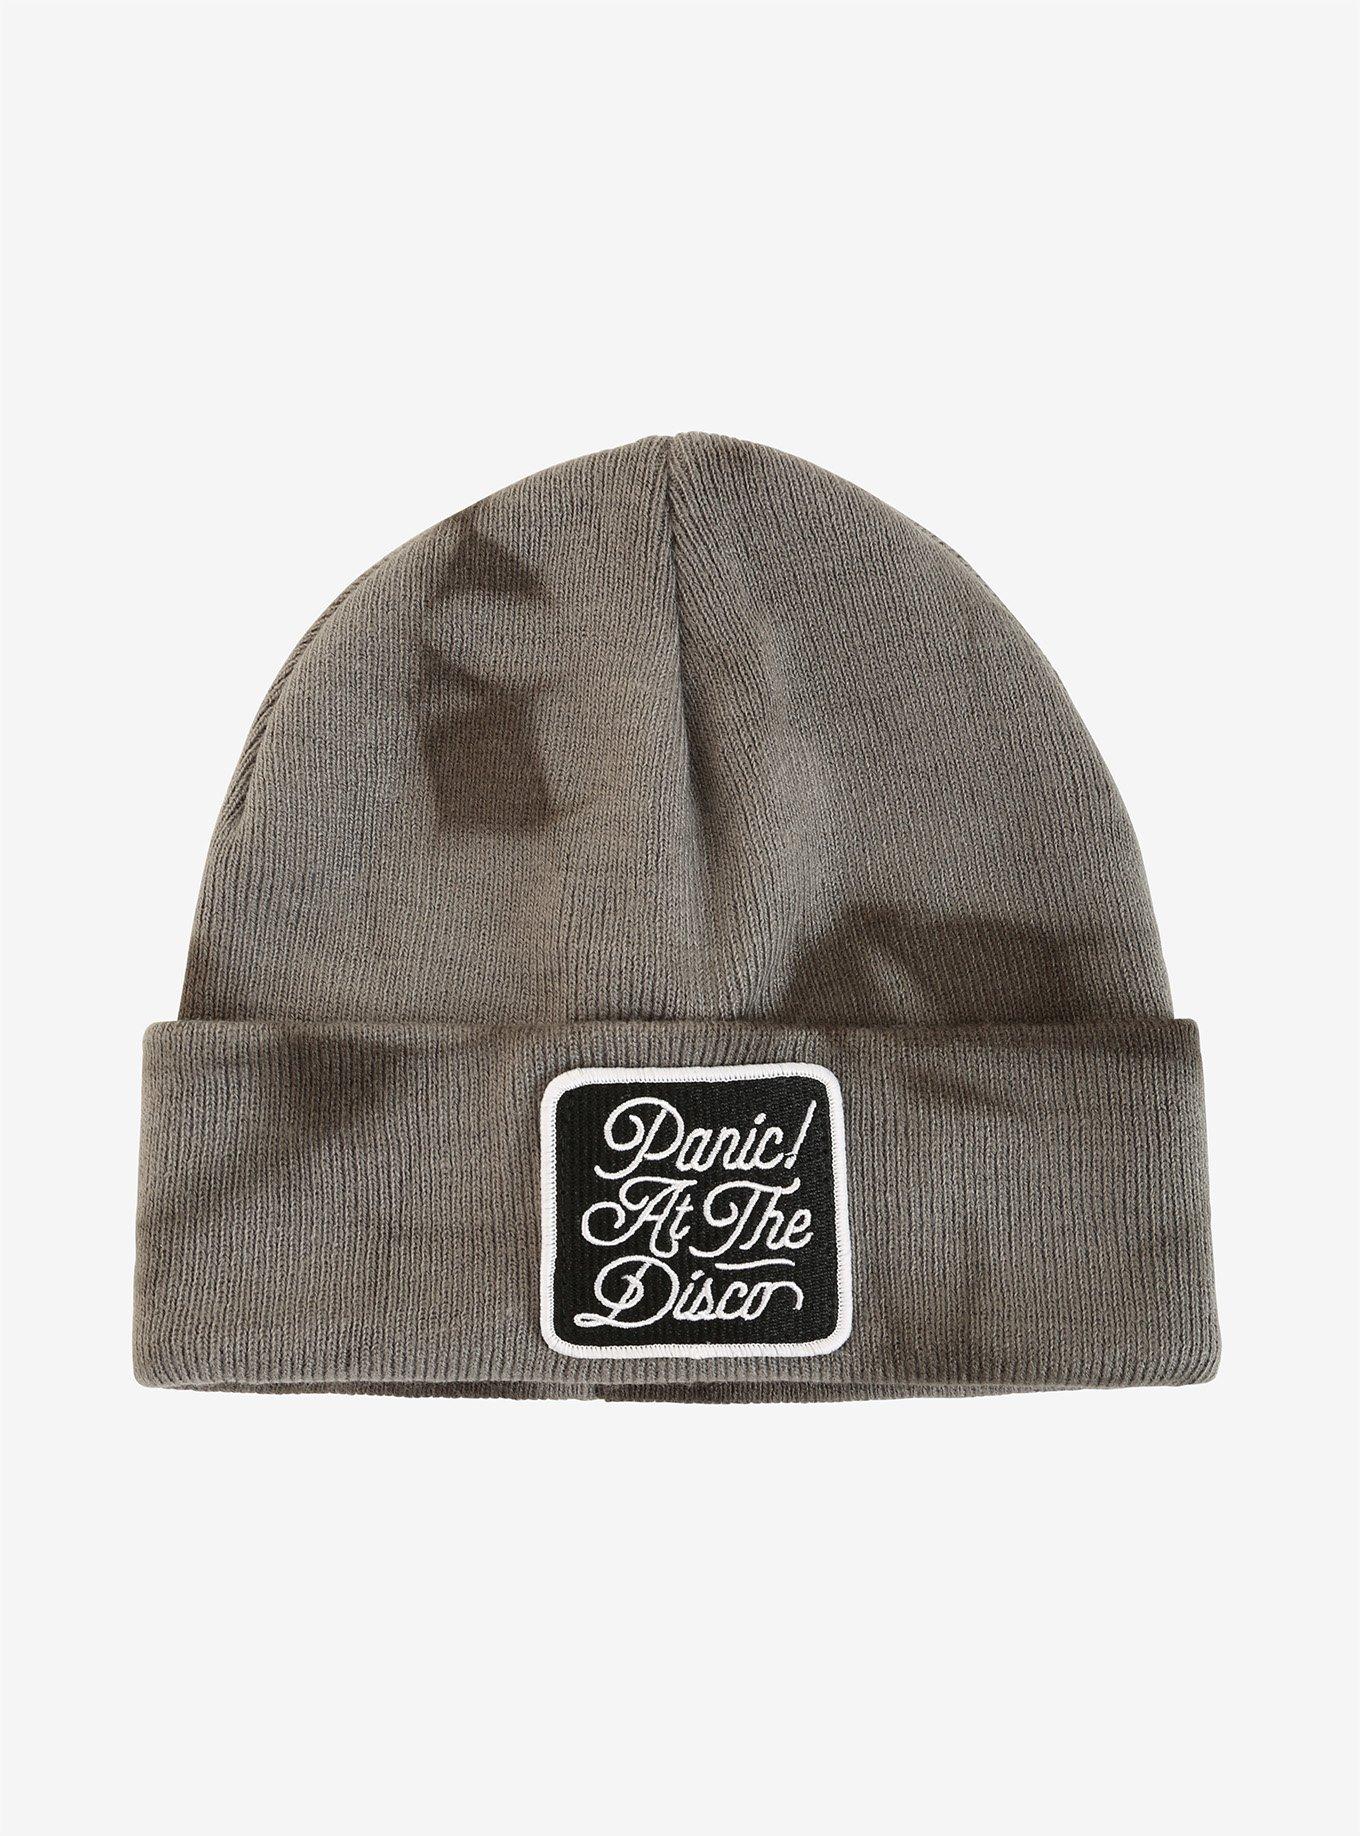 Panic! At The Disco Patch Wash Watchman Beanie, , alternate